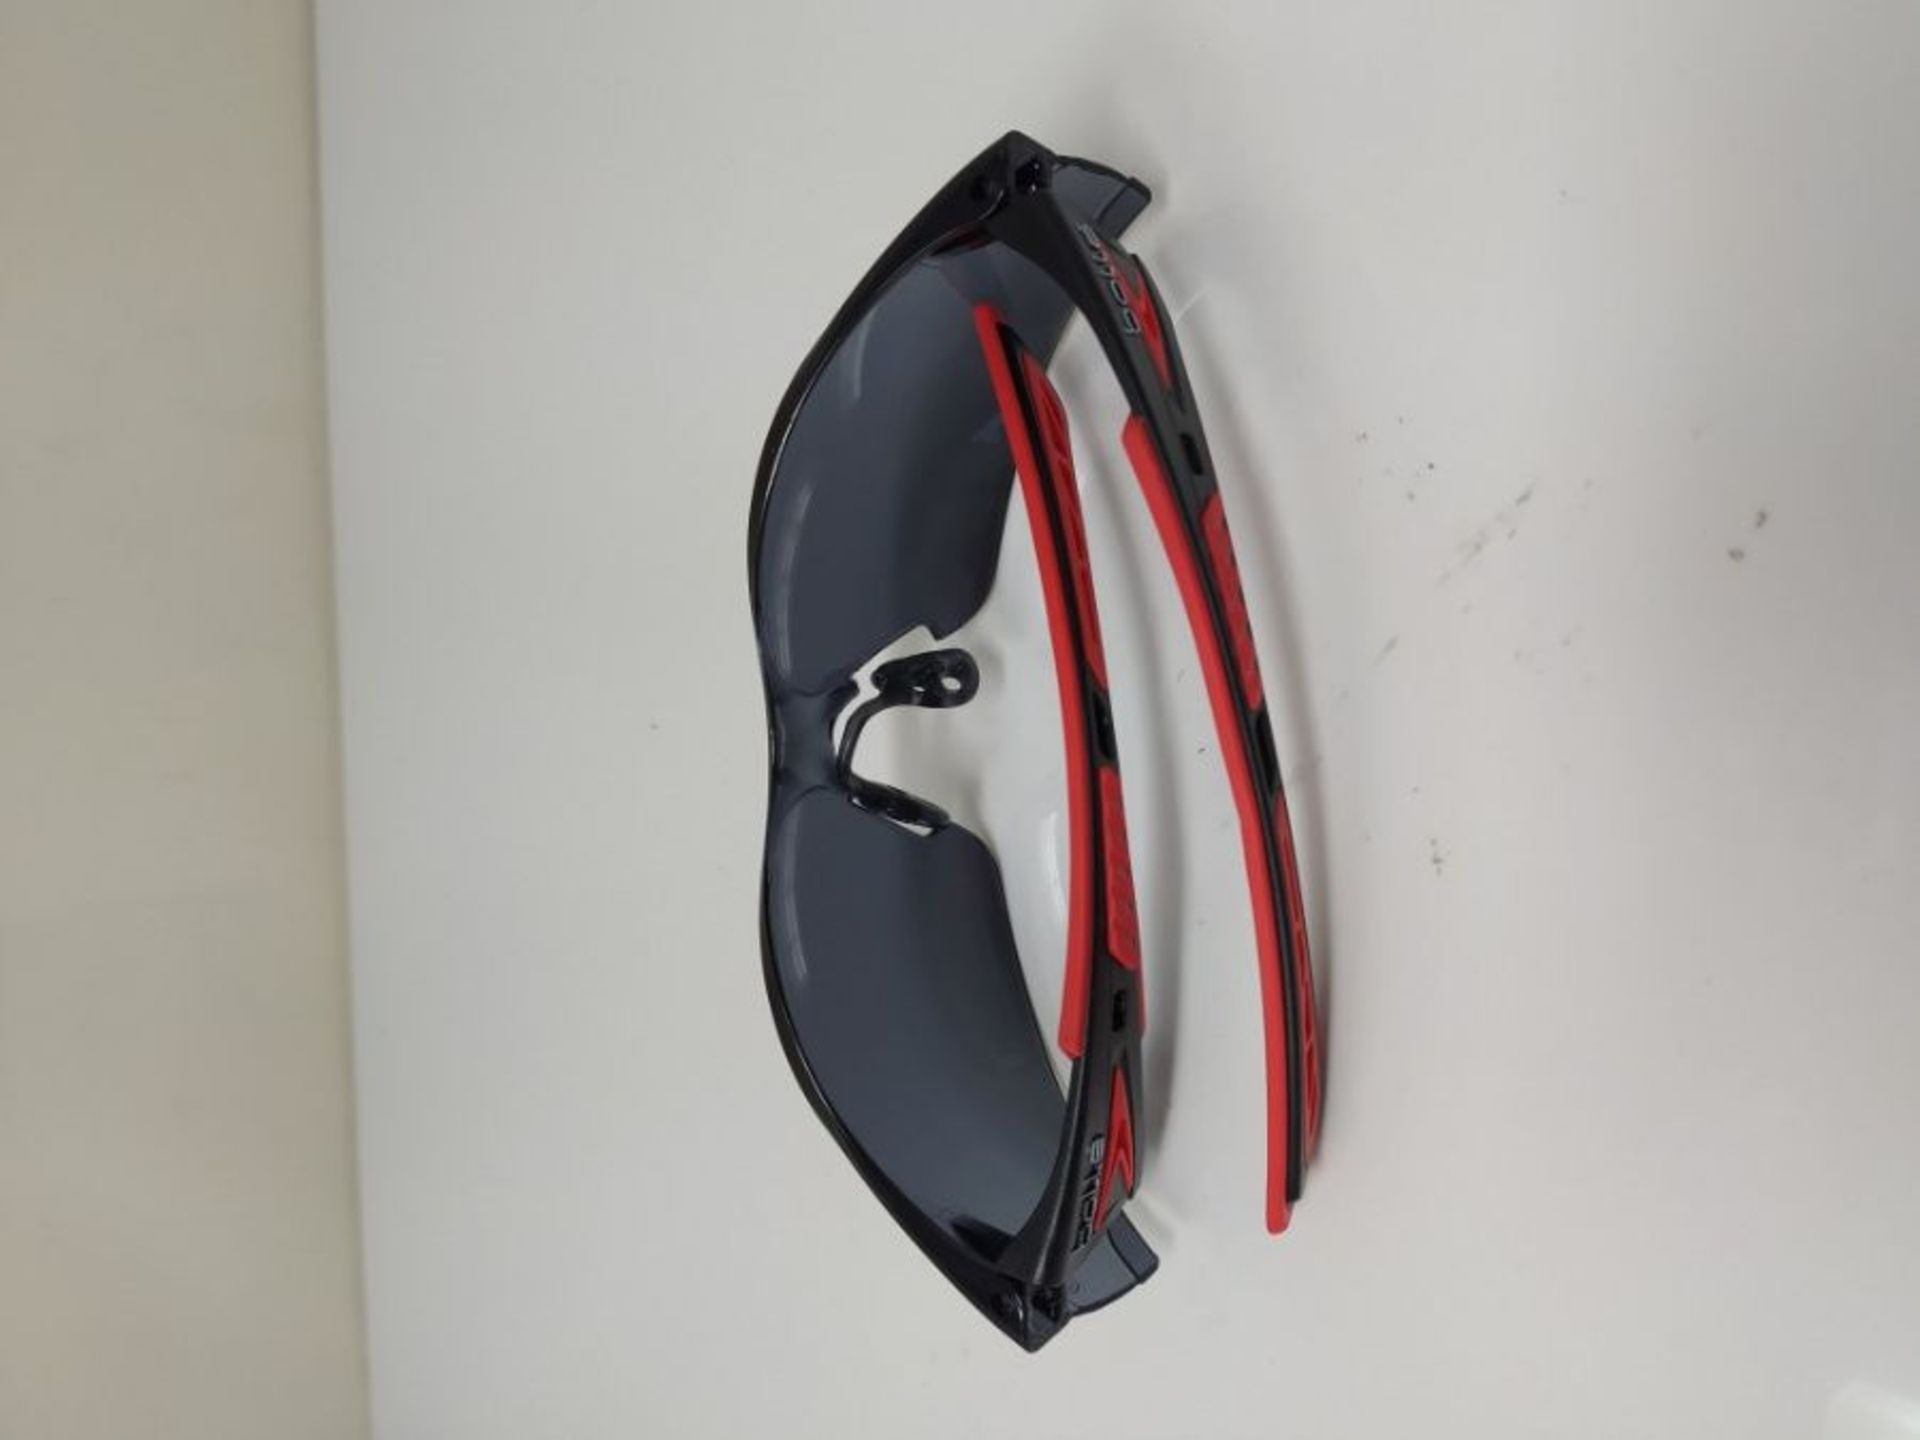 Bolle RUSHPPSF Rush Plus Spectacles, Red/Black - Image 3 of 3